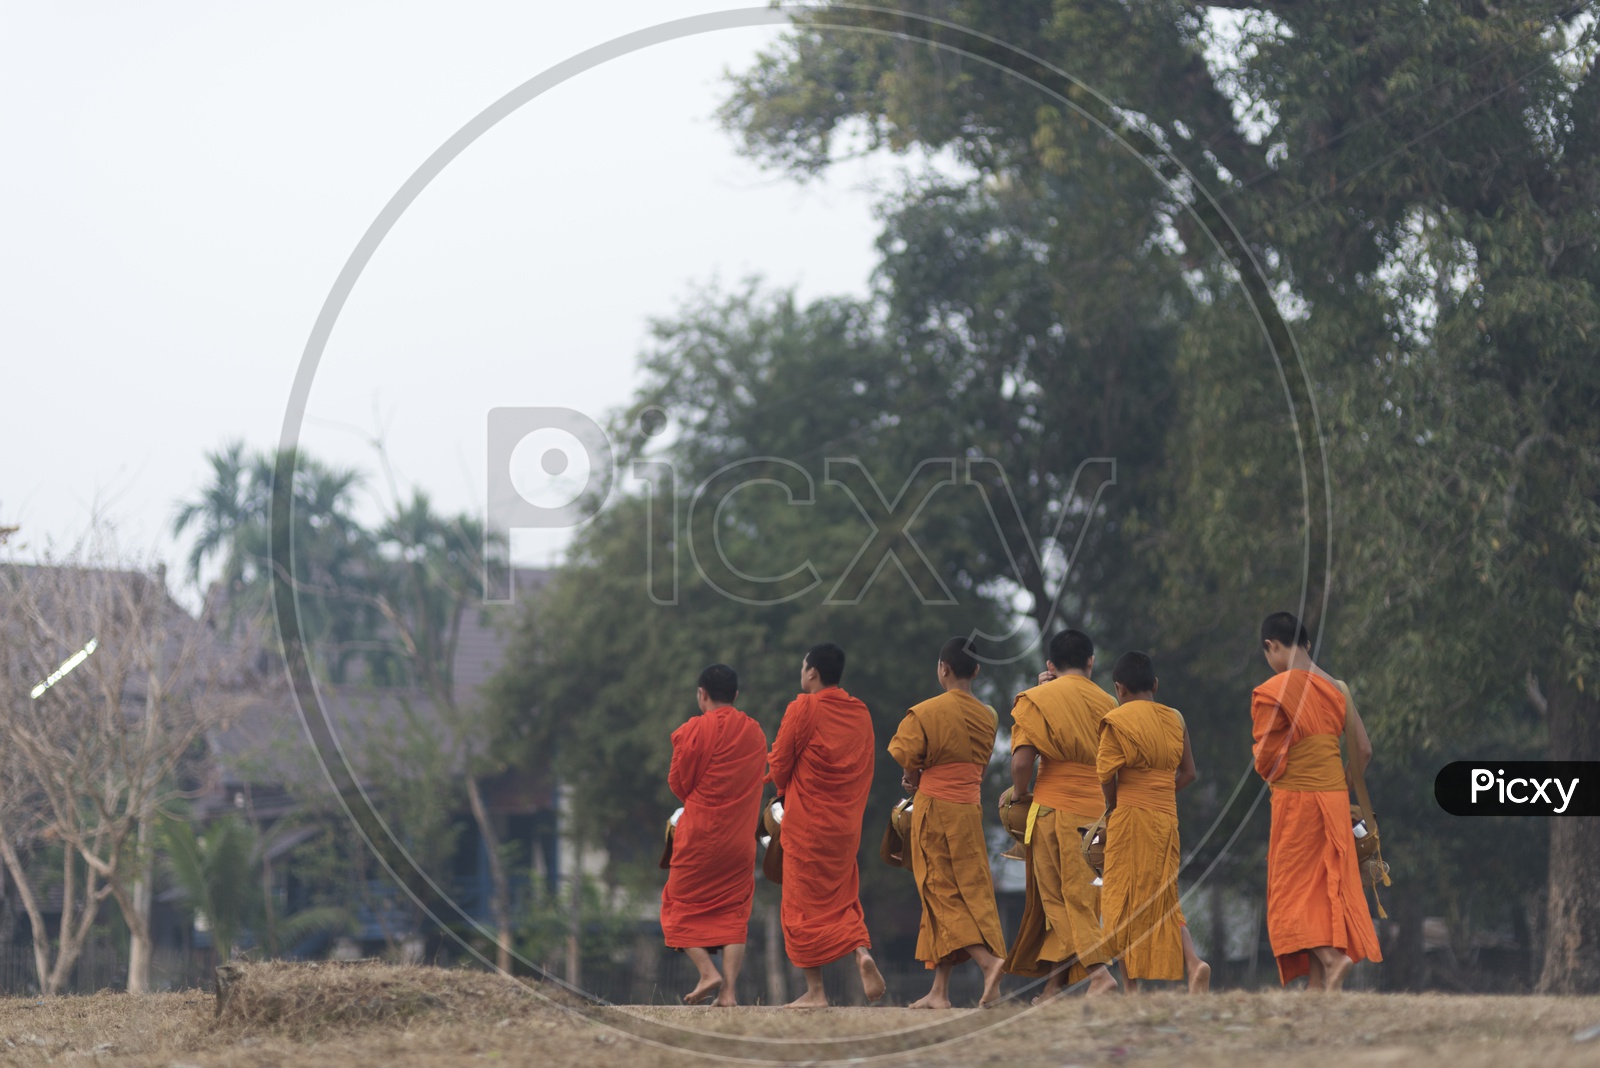 Traditional Alms buddhist monks on the streets of Luang Prabang, Laos